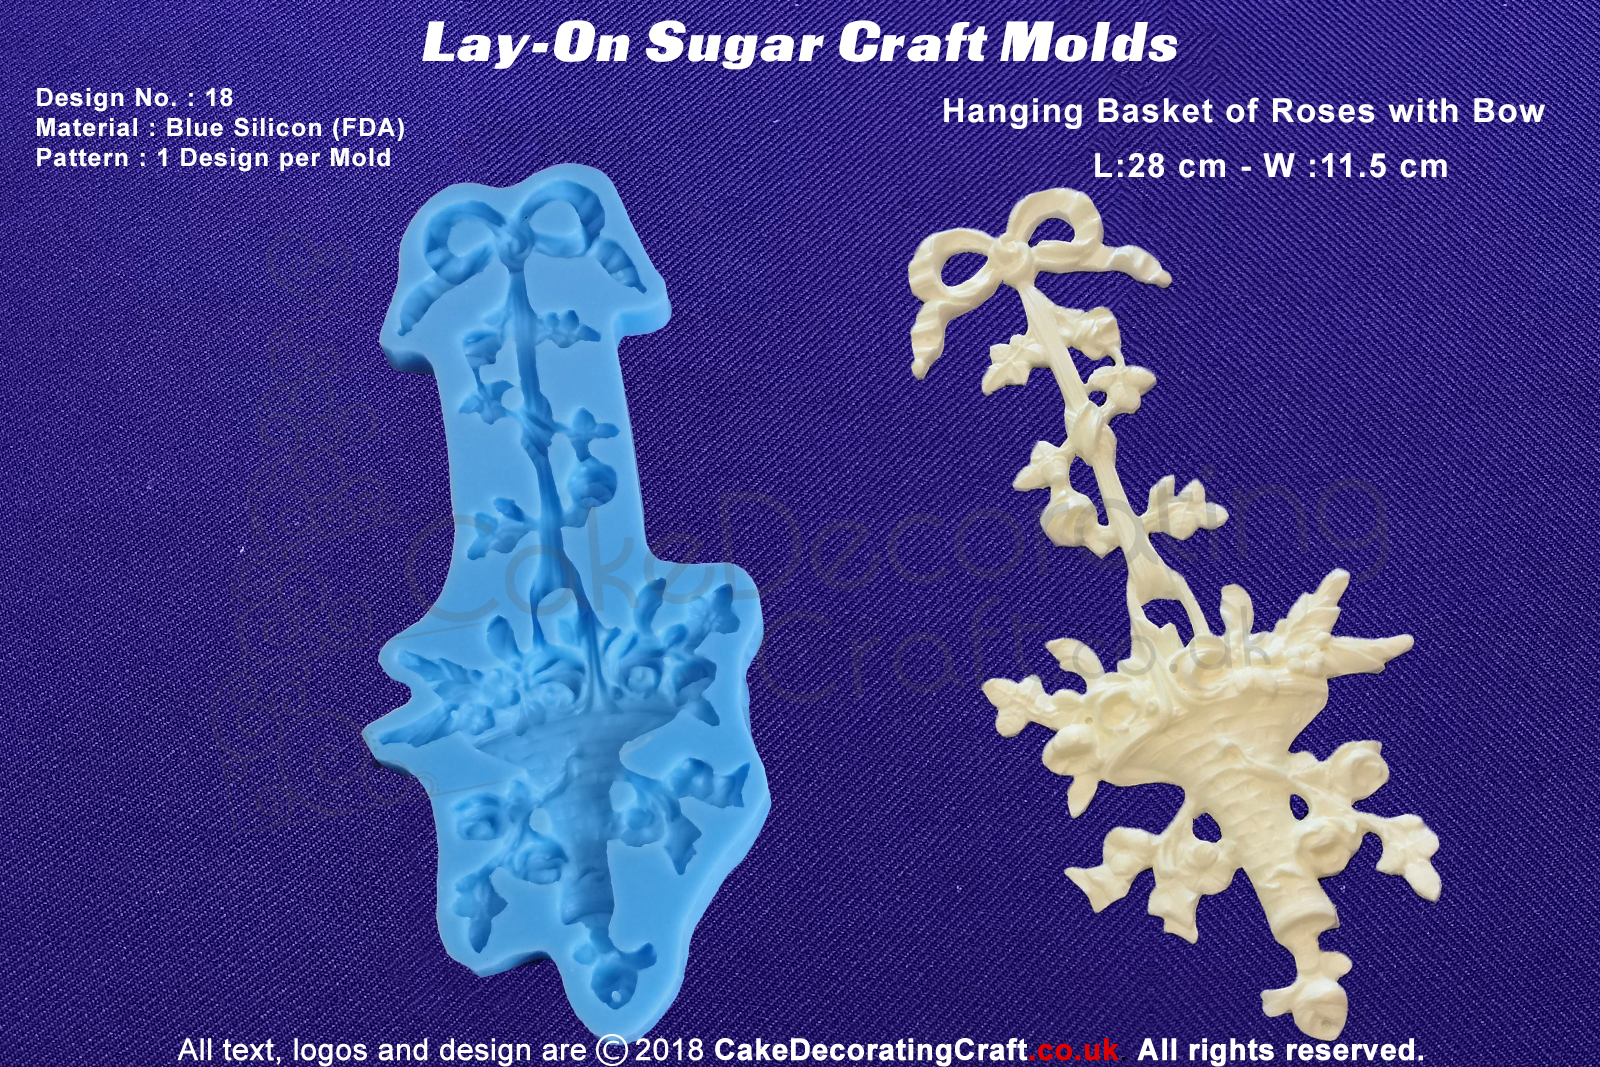 Design 18 | Lay-On Silicone Cake Molds | Deep Floral Roses | Wedding Cakes | Design | Sugar Cake Decorating Craft 